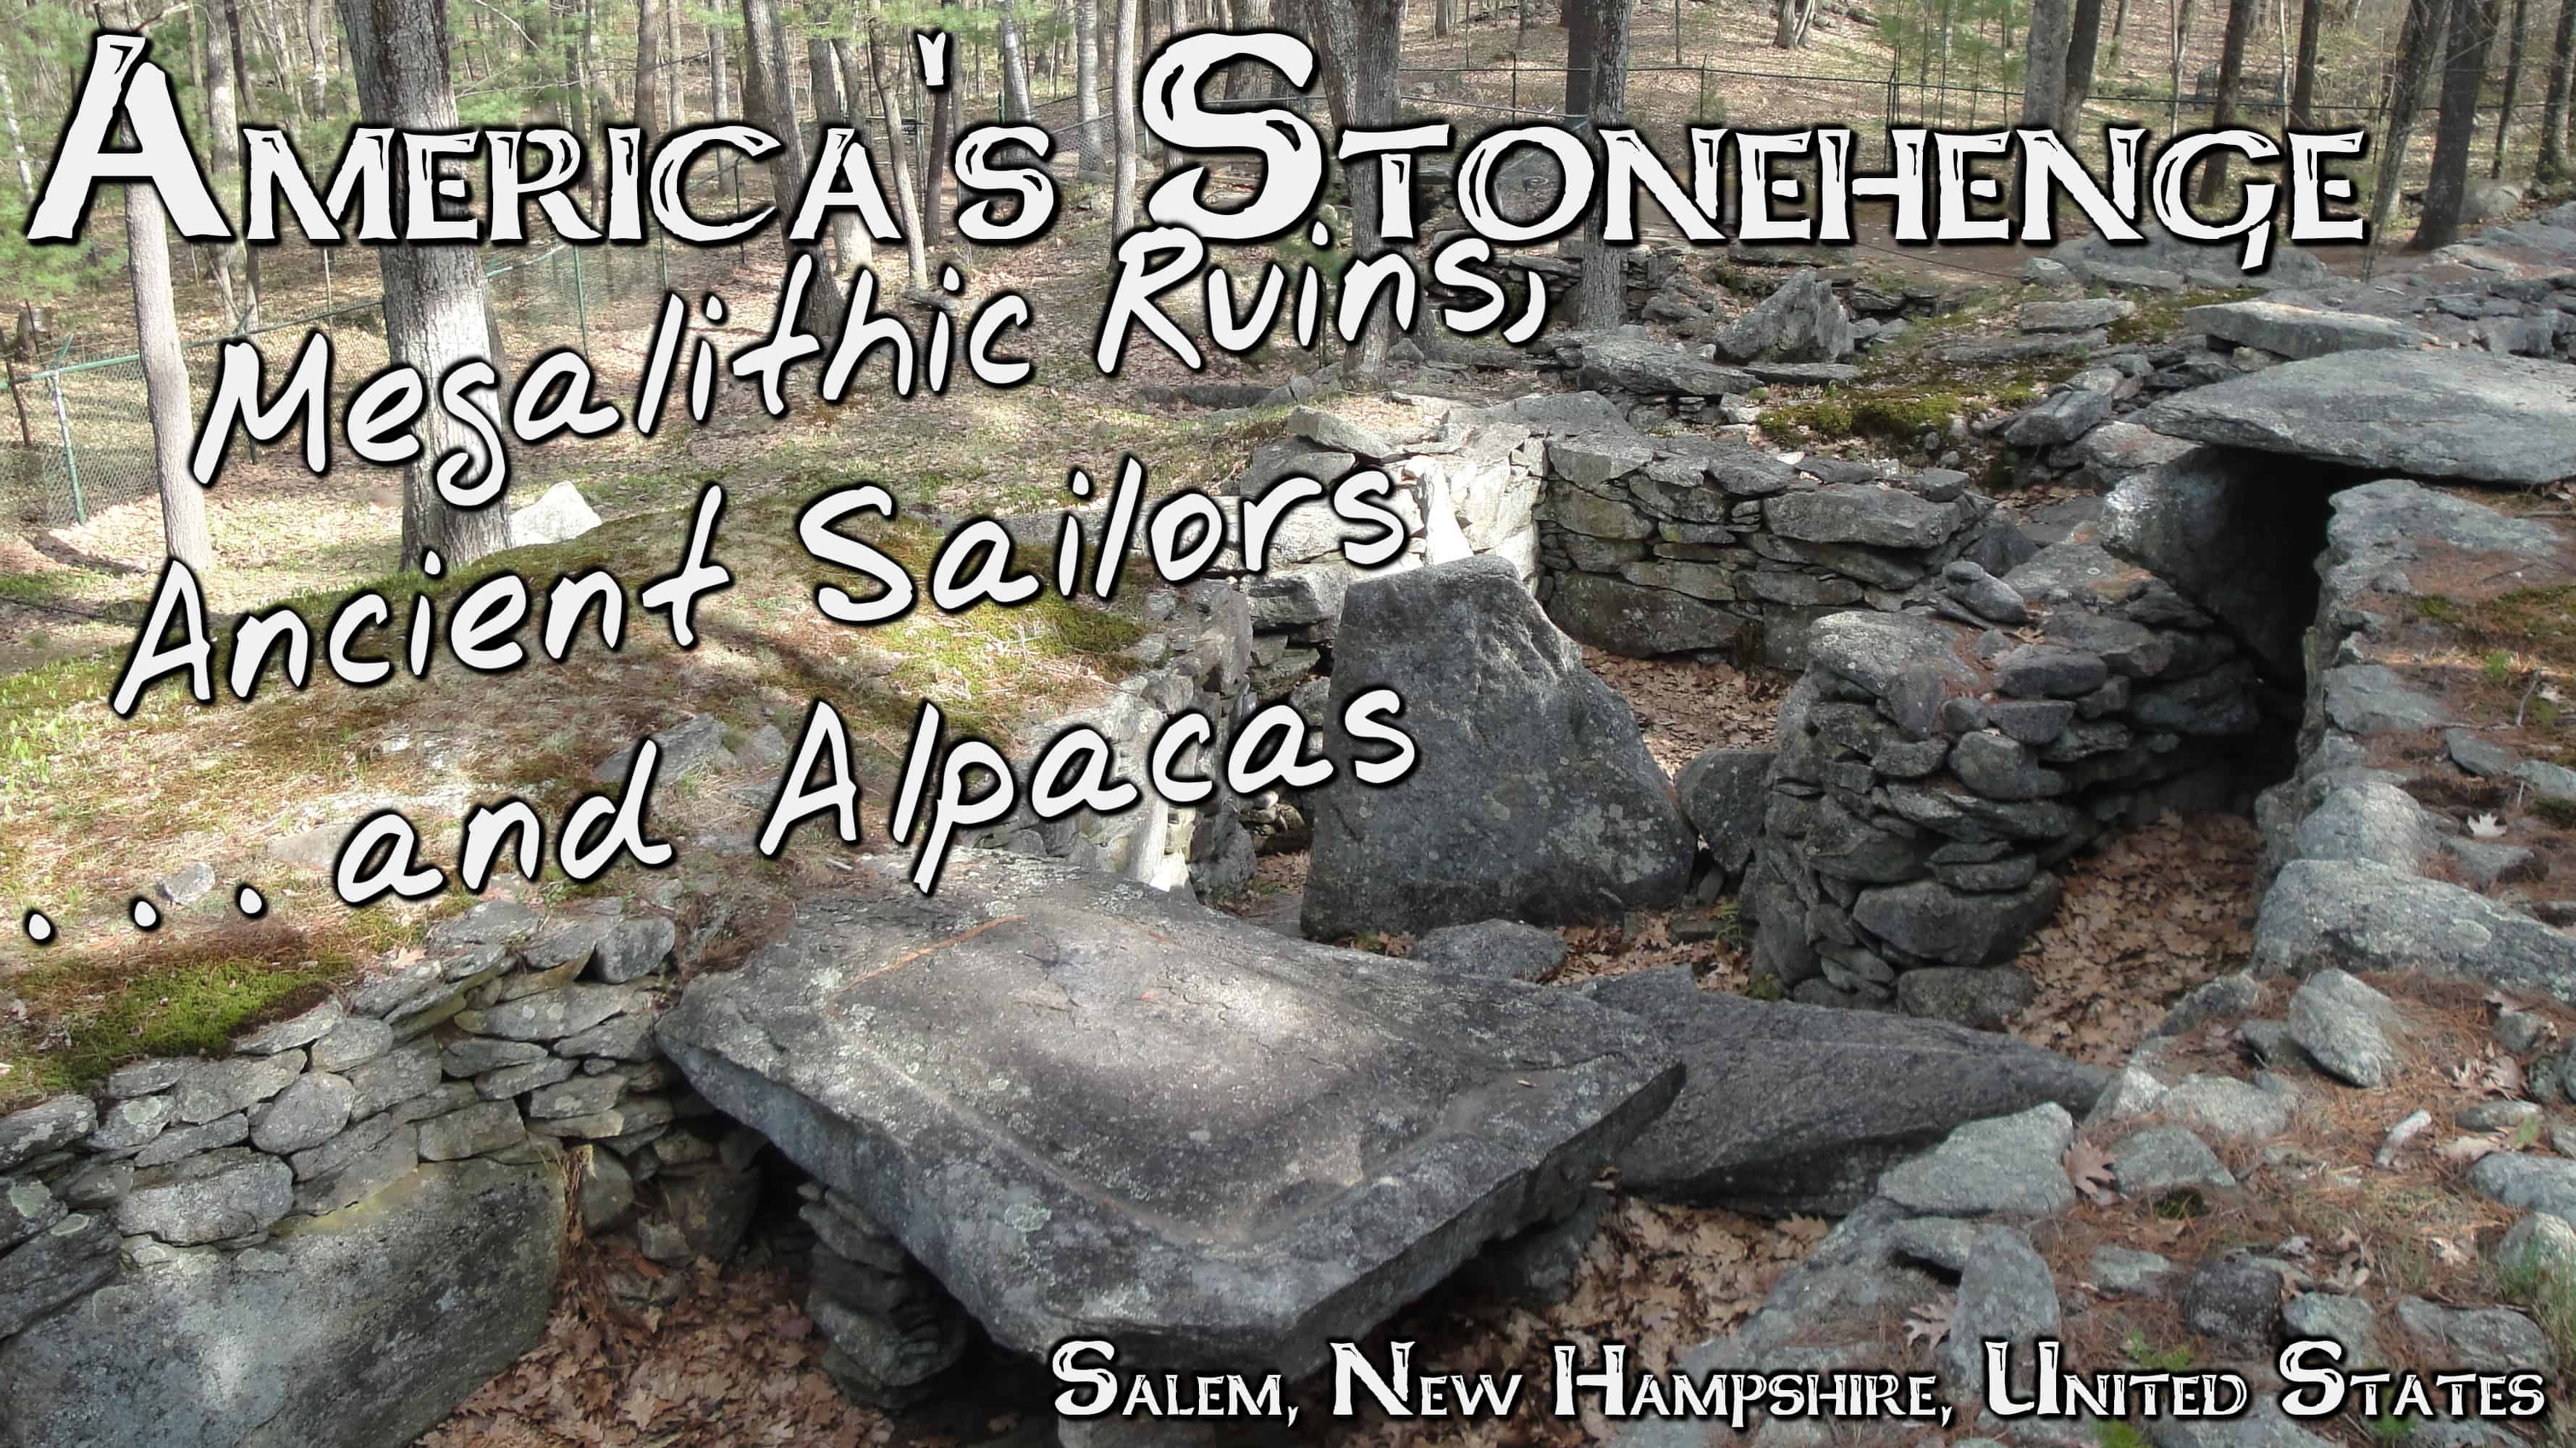 America’s Stonehenge: Megalithic Ruins, Ancient Sailors . . . and Alpacas